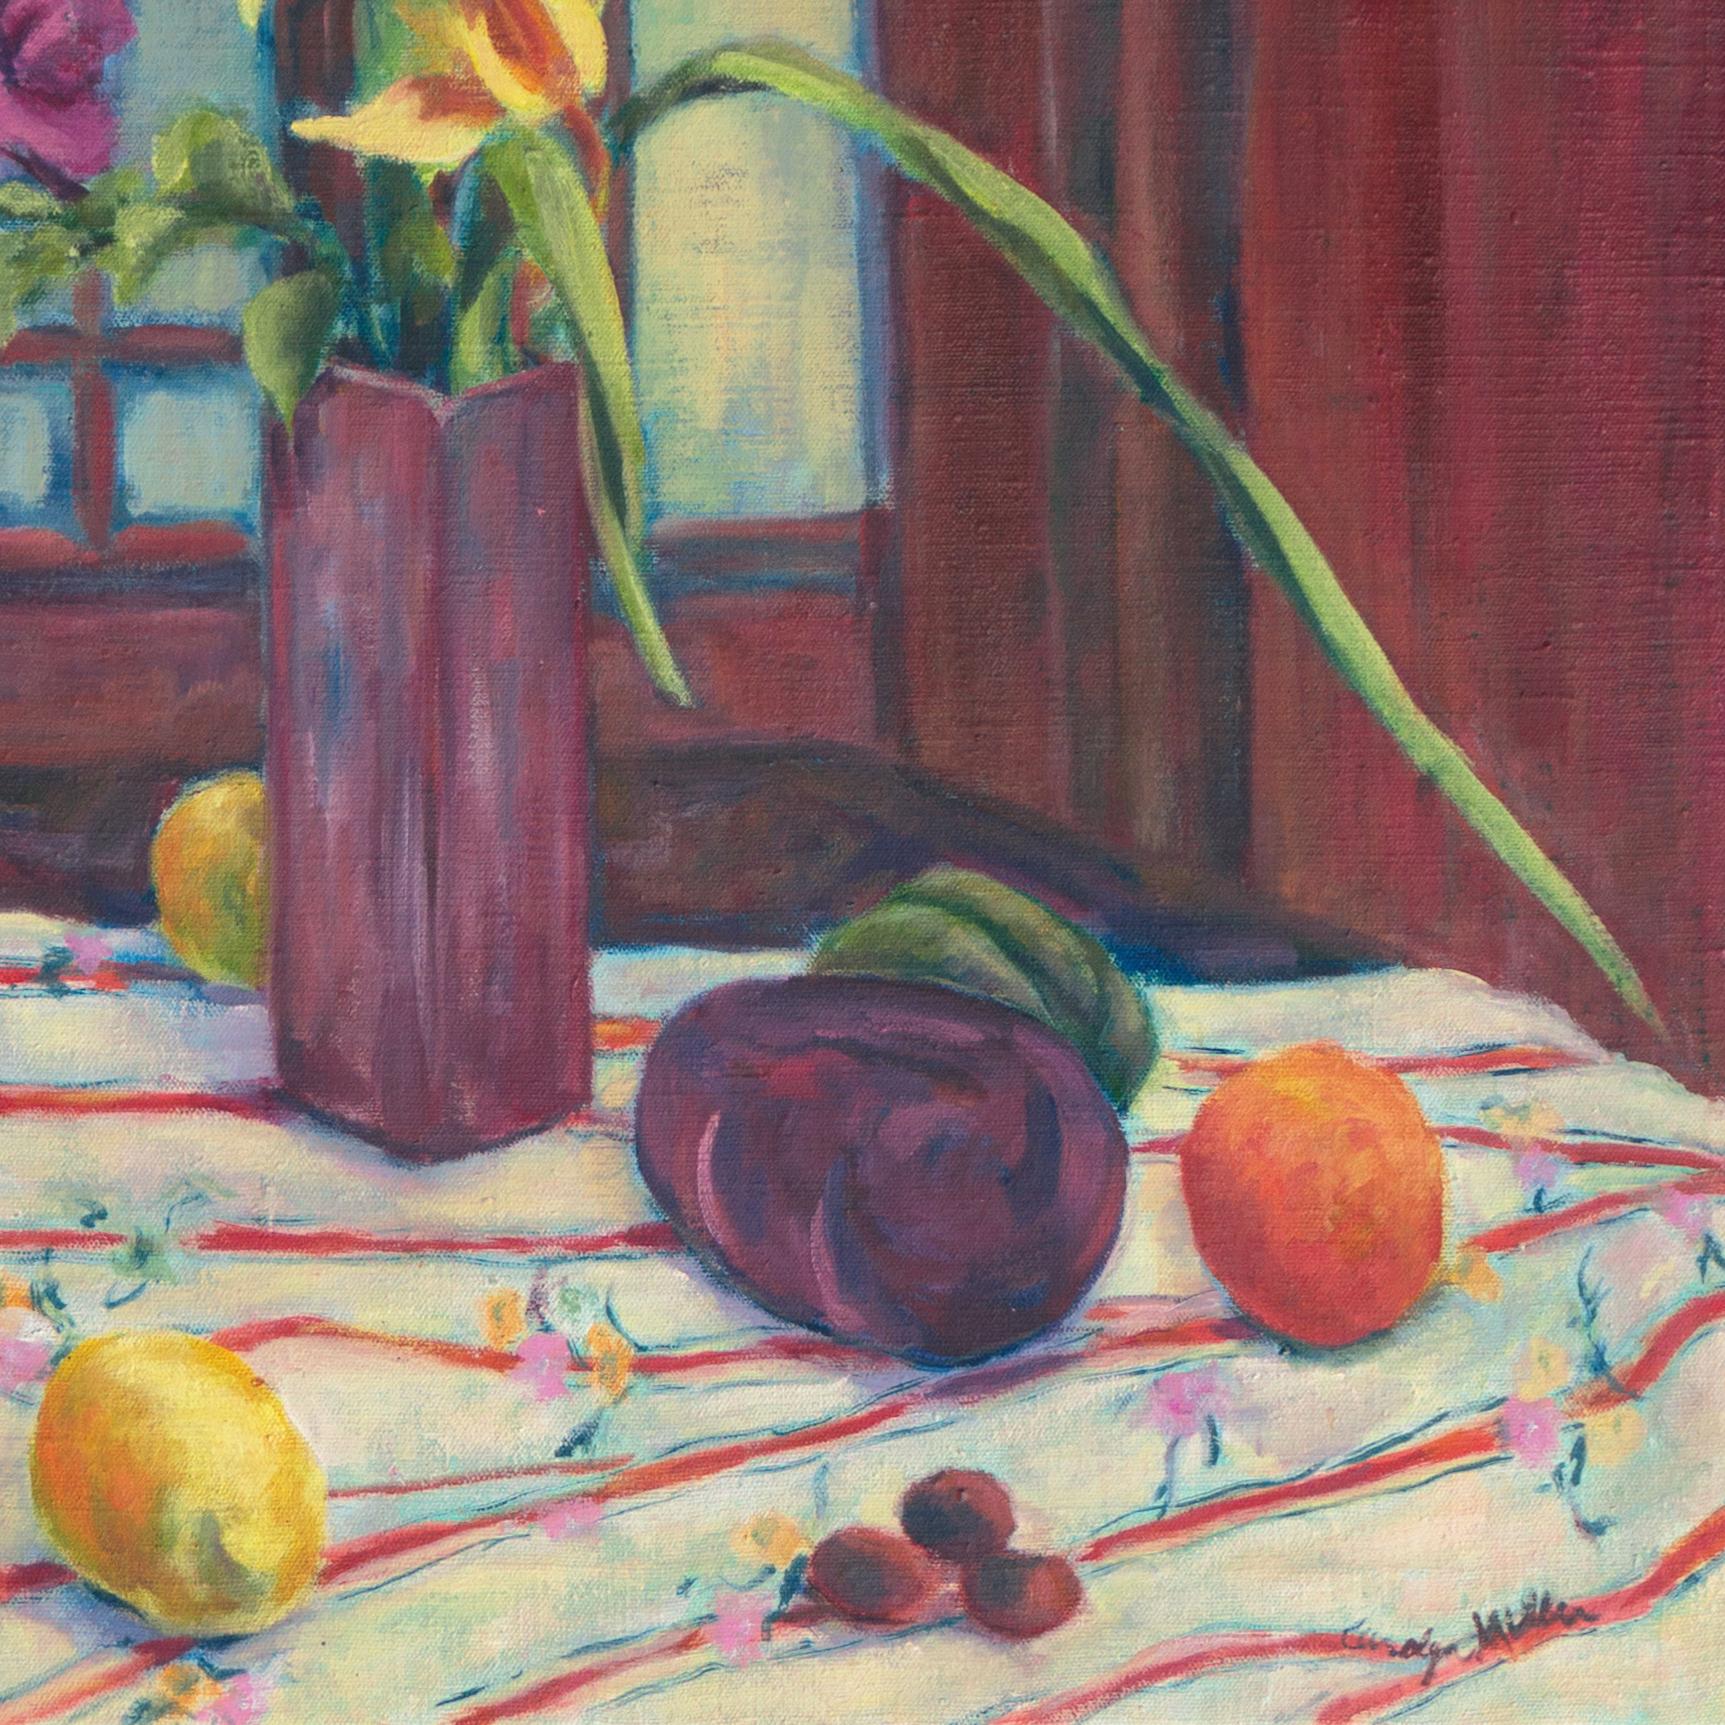 Signed lower right, 'Carolyn Miller' (American, 20th century) and painted circa 1975.

A substantial, Post-Impressionist oil still-life showing a view of various objects, including yellow orchids informally arranged in a purple vase, set on a table